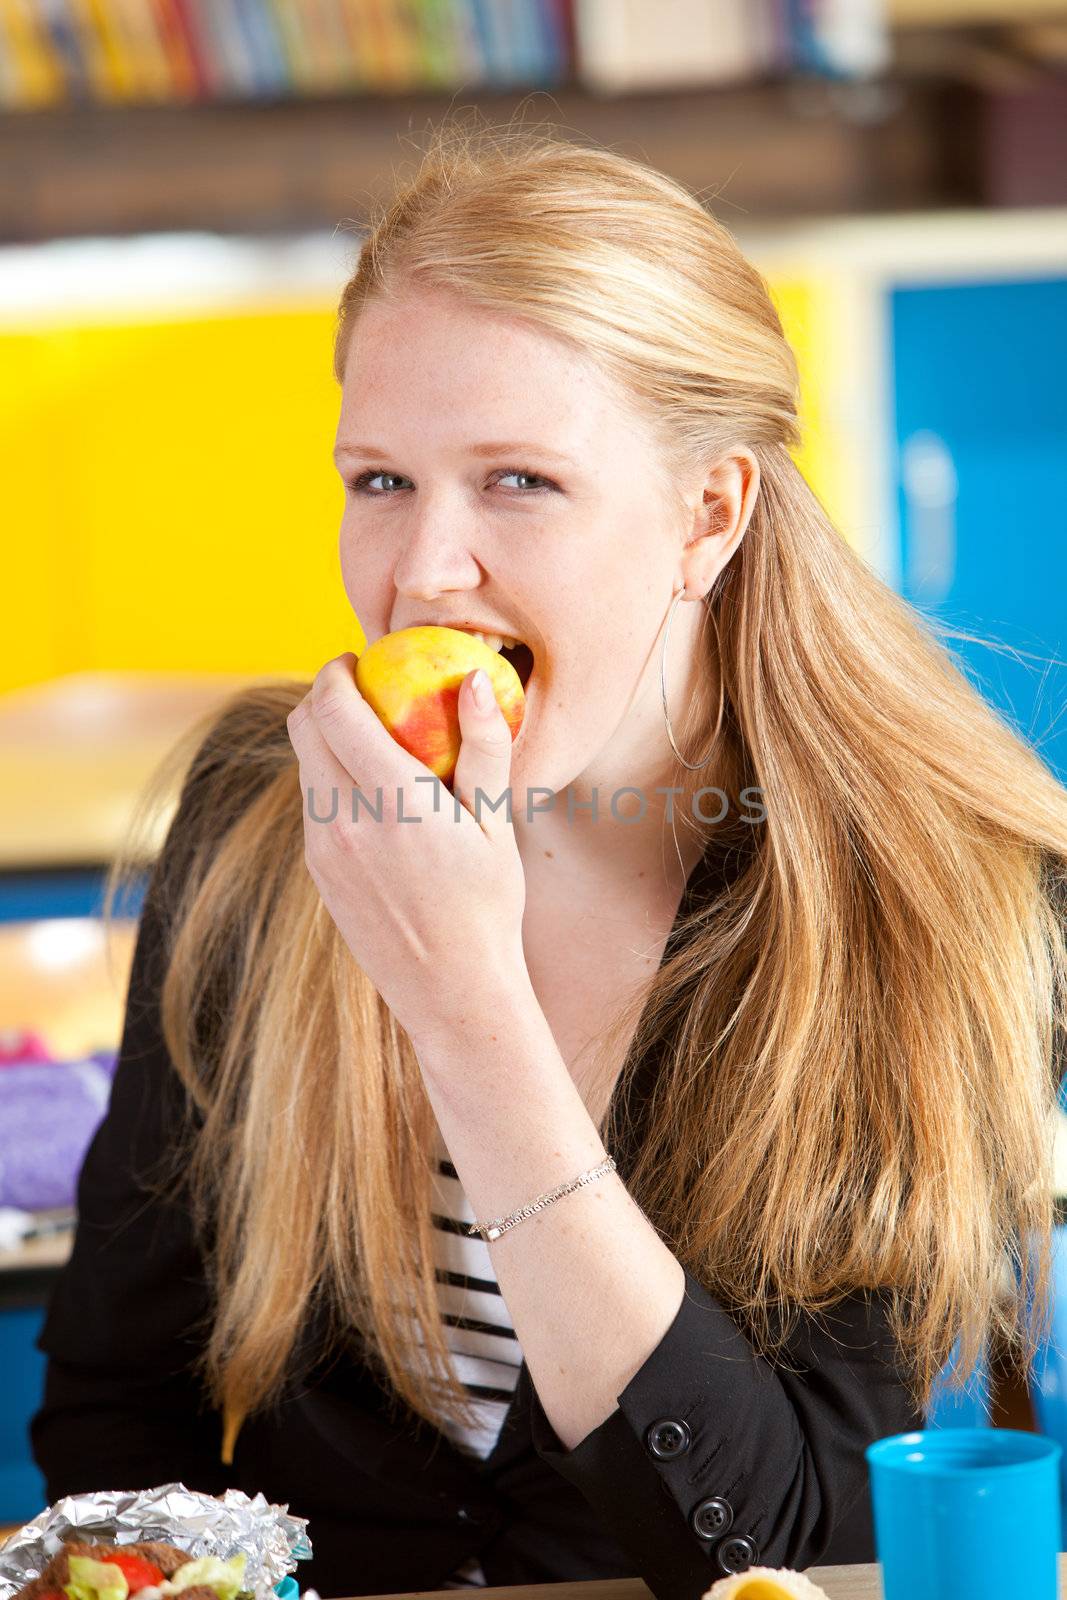 Eating a healthy apple by Fotosmurf